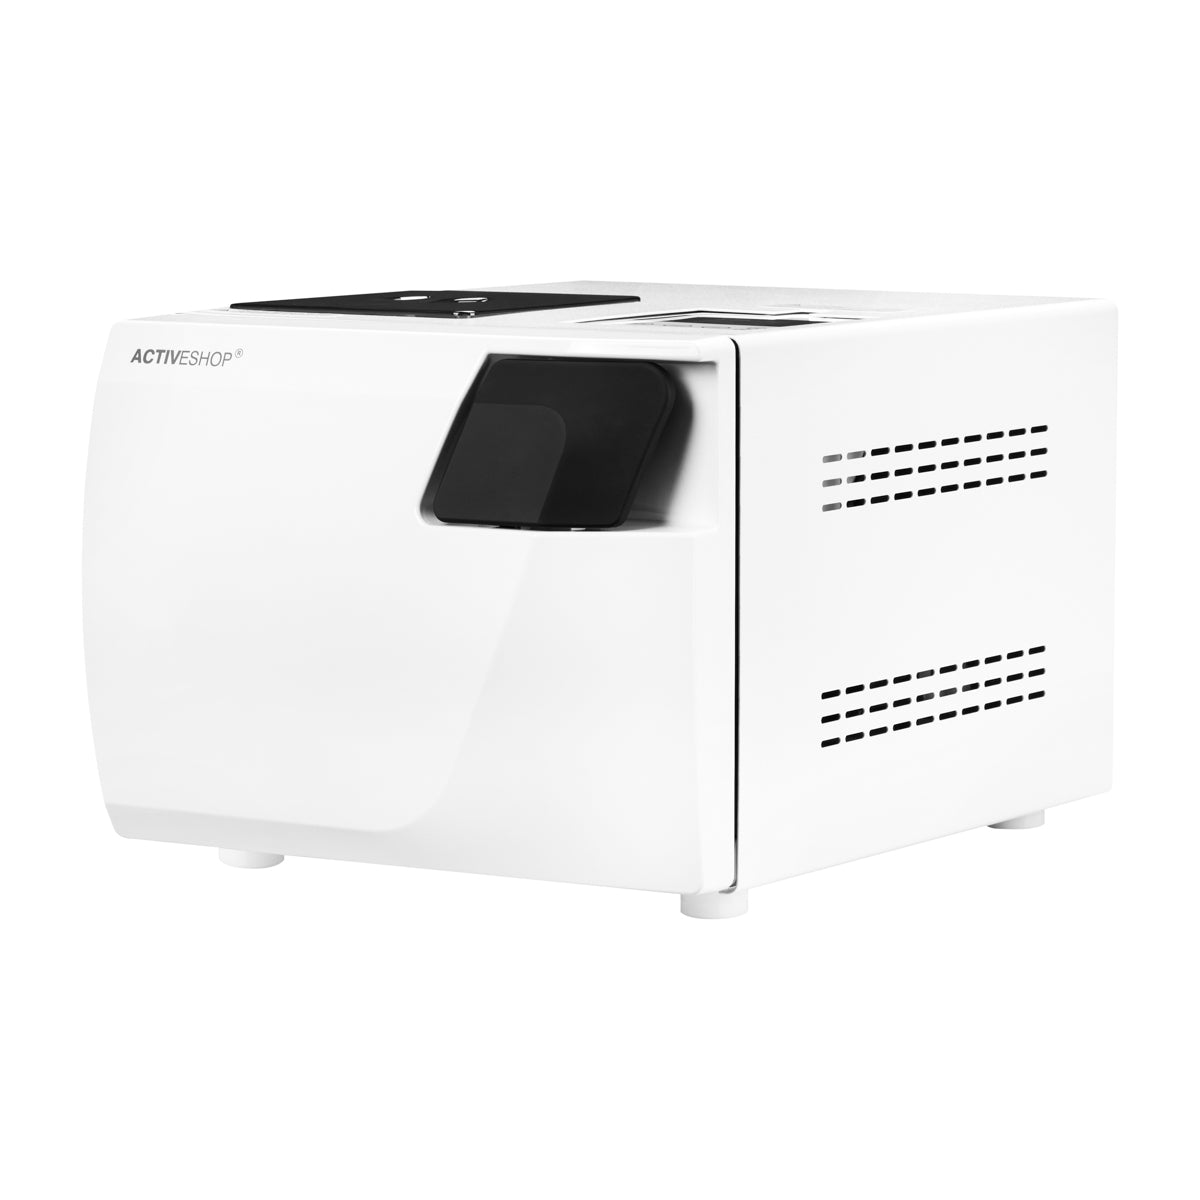 Lafomed Autoclave Compact Line LFSS23AC 23 L class B with a printer